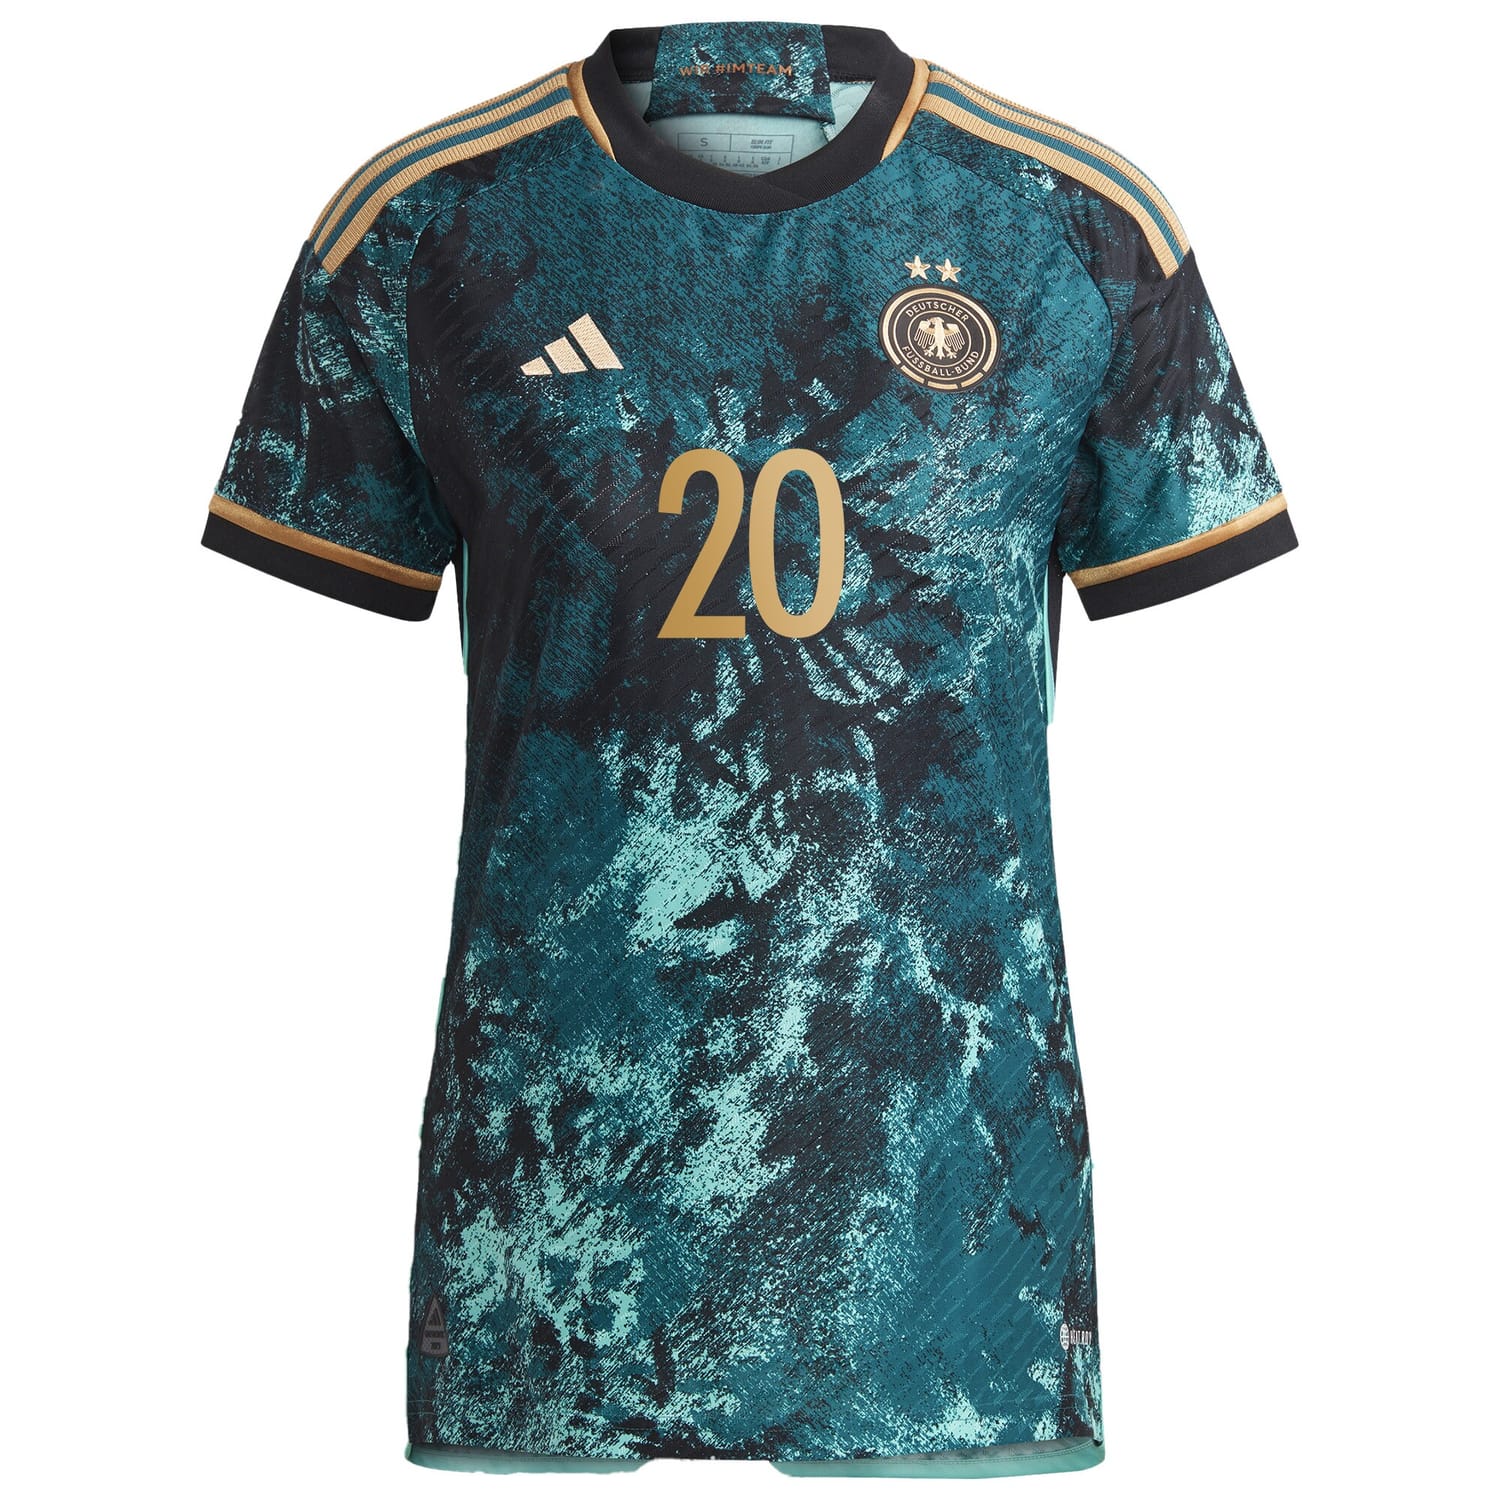 Germany National Team Away Authentic Jersey Shirt 2023 player Lina Magull 20 printing for Women